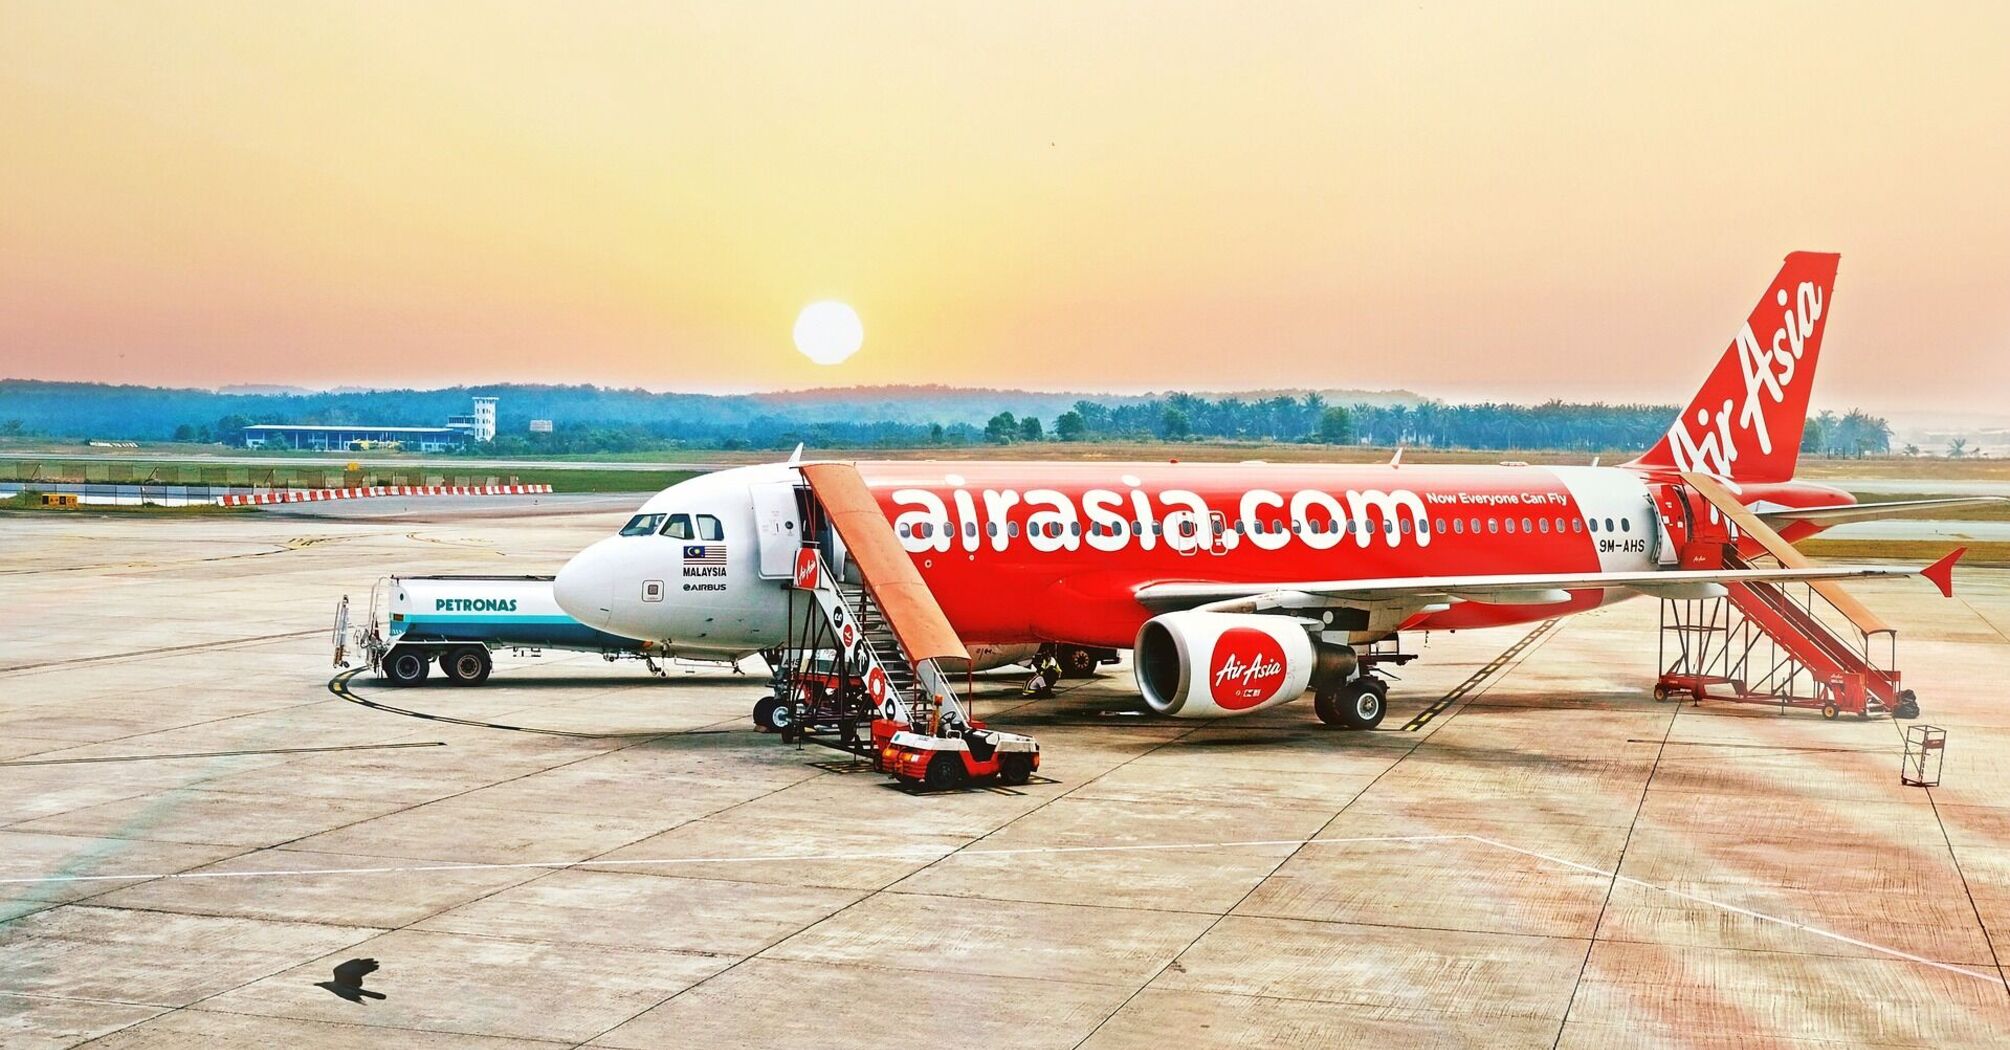 AirAsia airplane parked on the tarmac at sunrise, with passenger stair attached